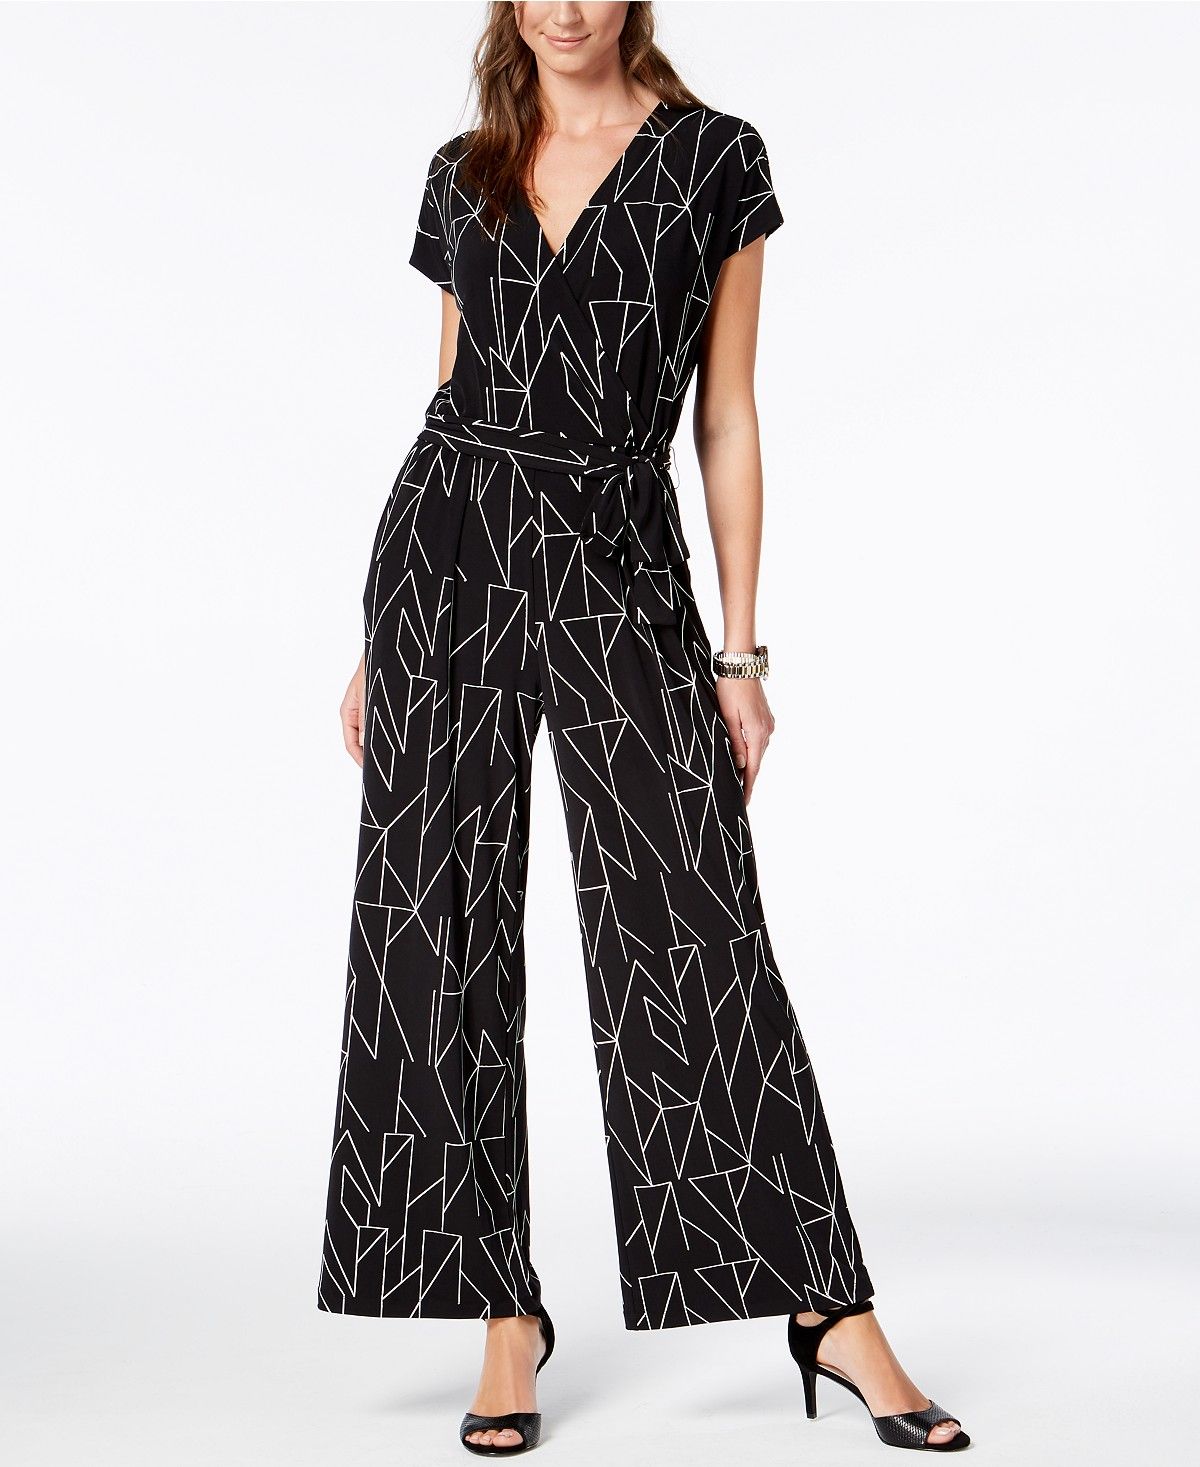 21 flattering jumpsuits for every body shape | Woman & Home